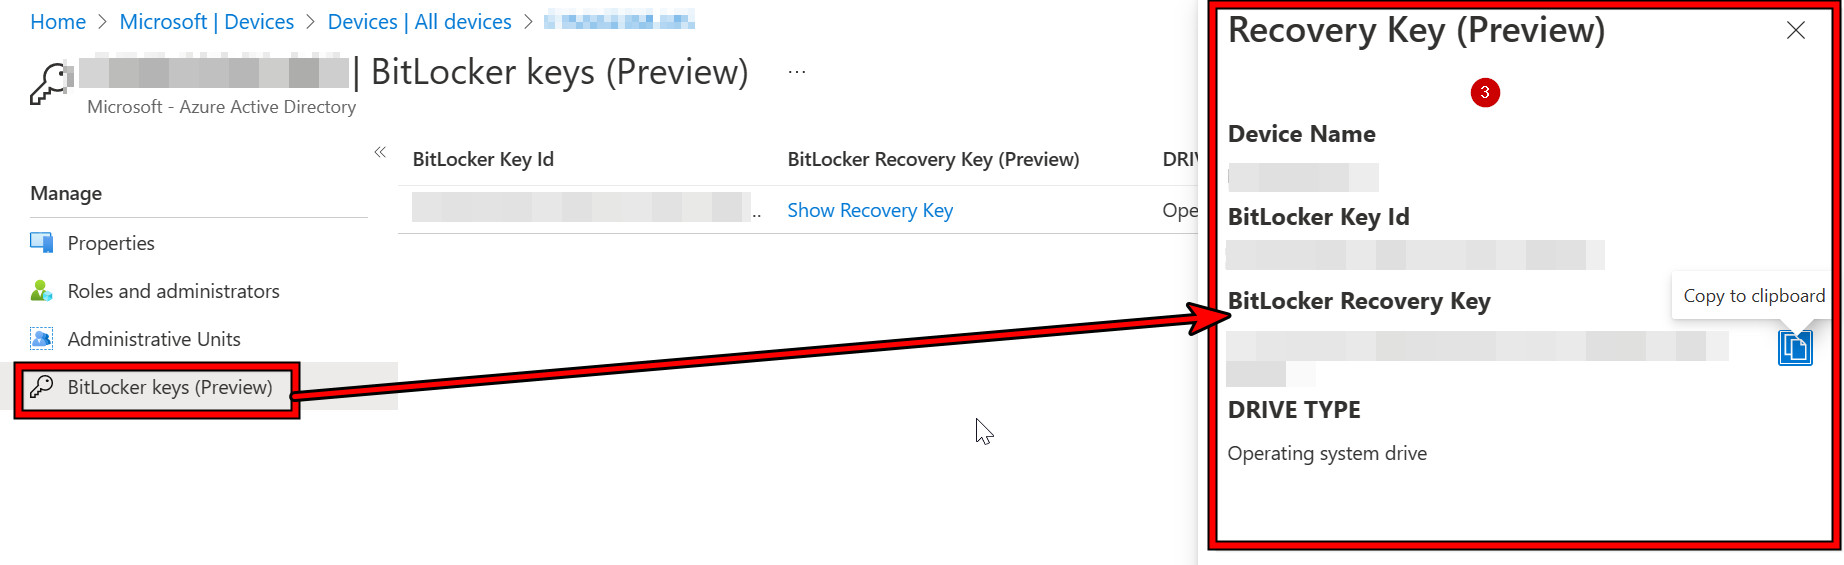 Recover the BitLocker Key from the Azure Active Directory